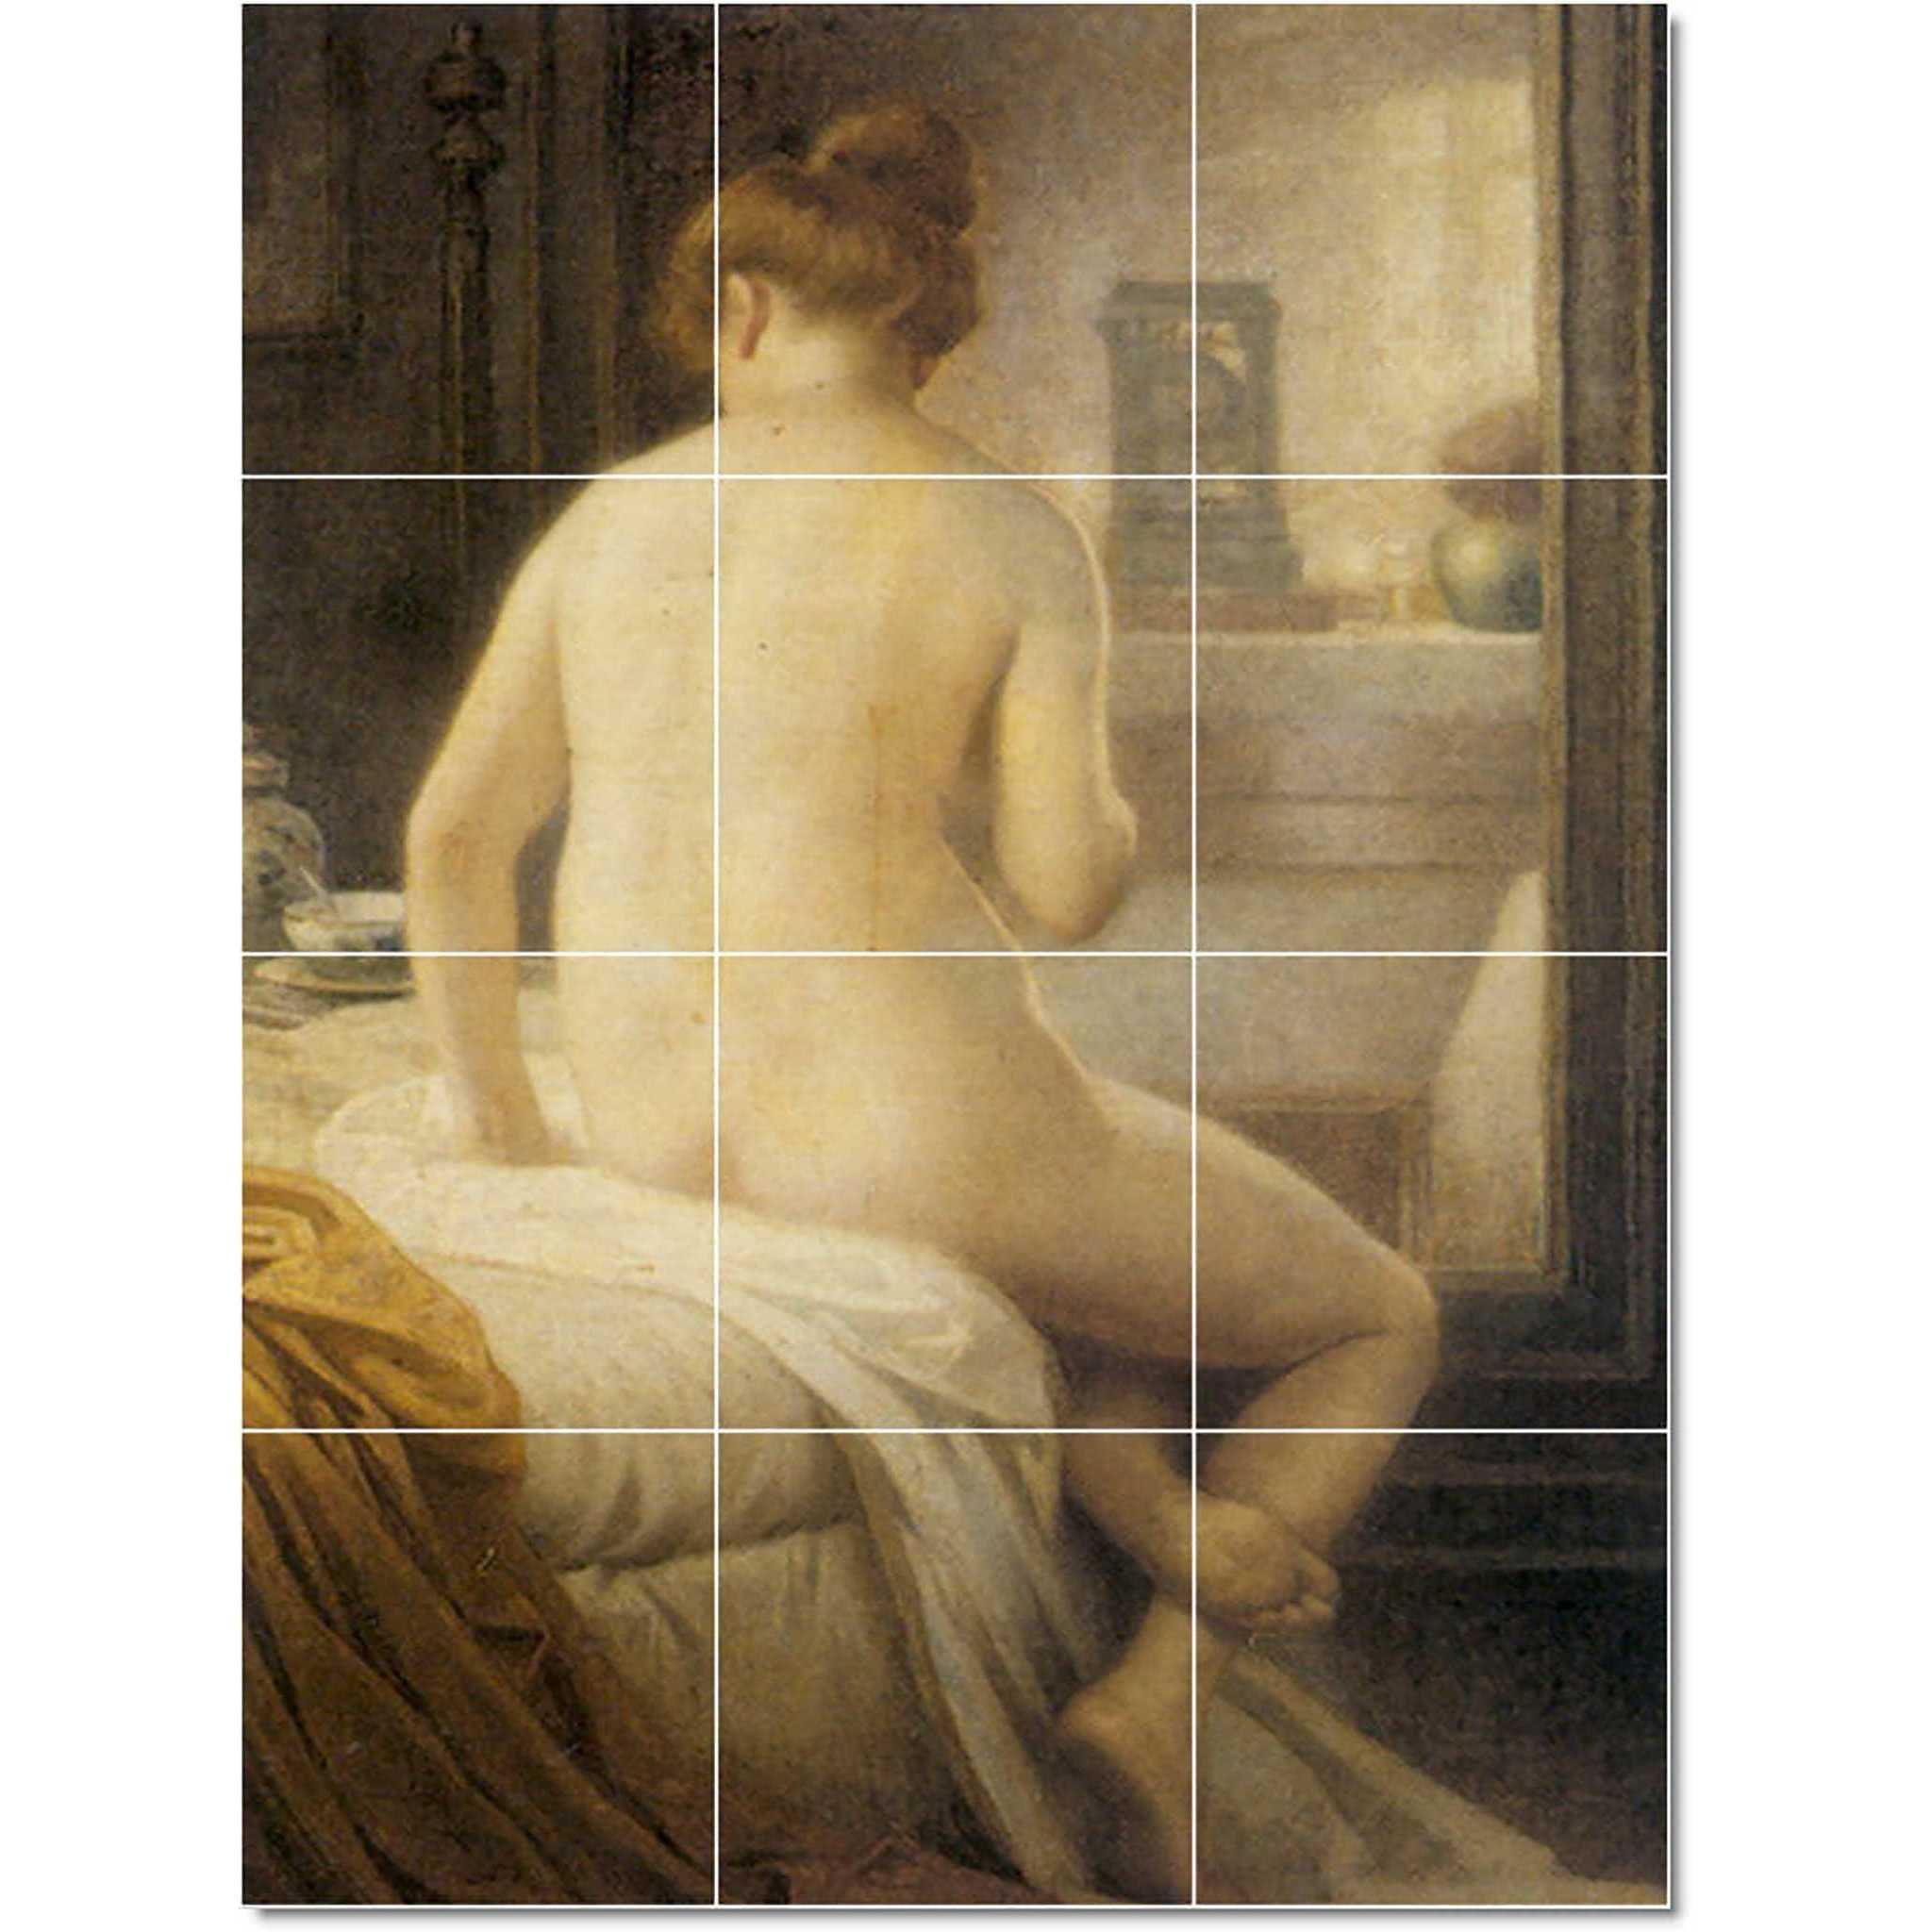 anthony troncet nude painting ceramic tile mural p23228